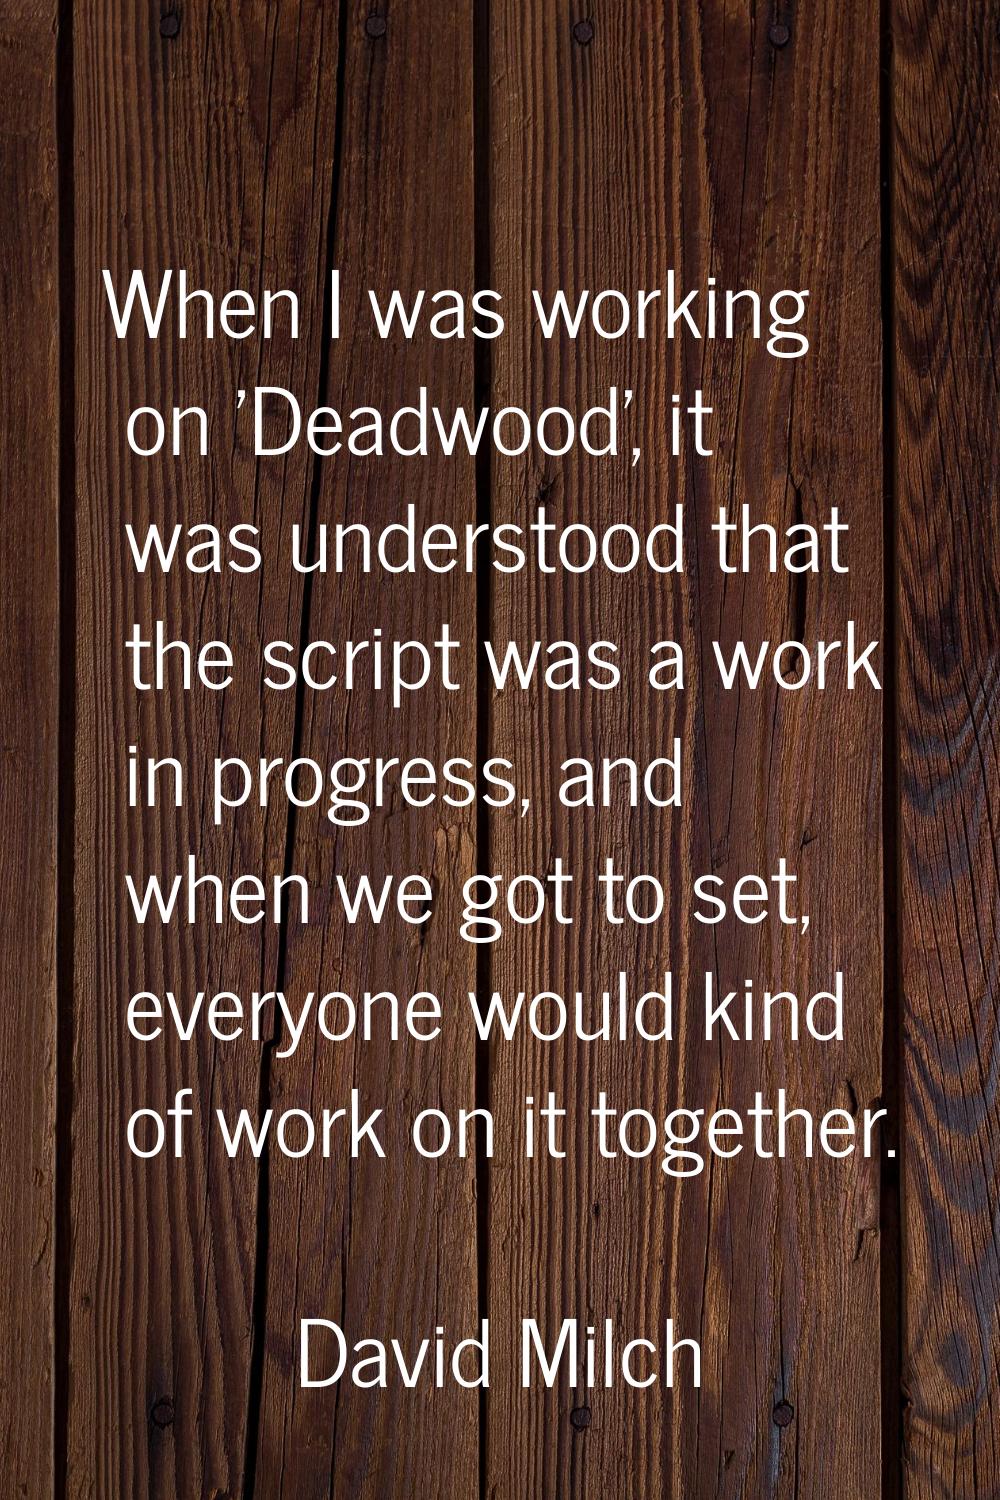 When I was working on 'Deadwood', it was understood that the script was a work in progress, and whe